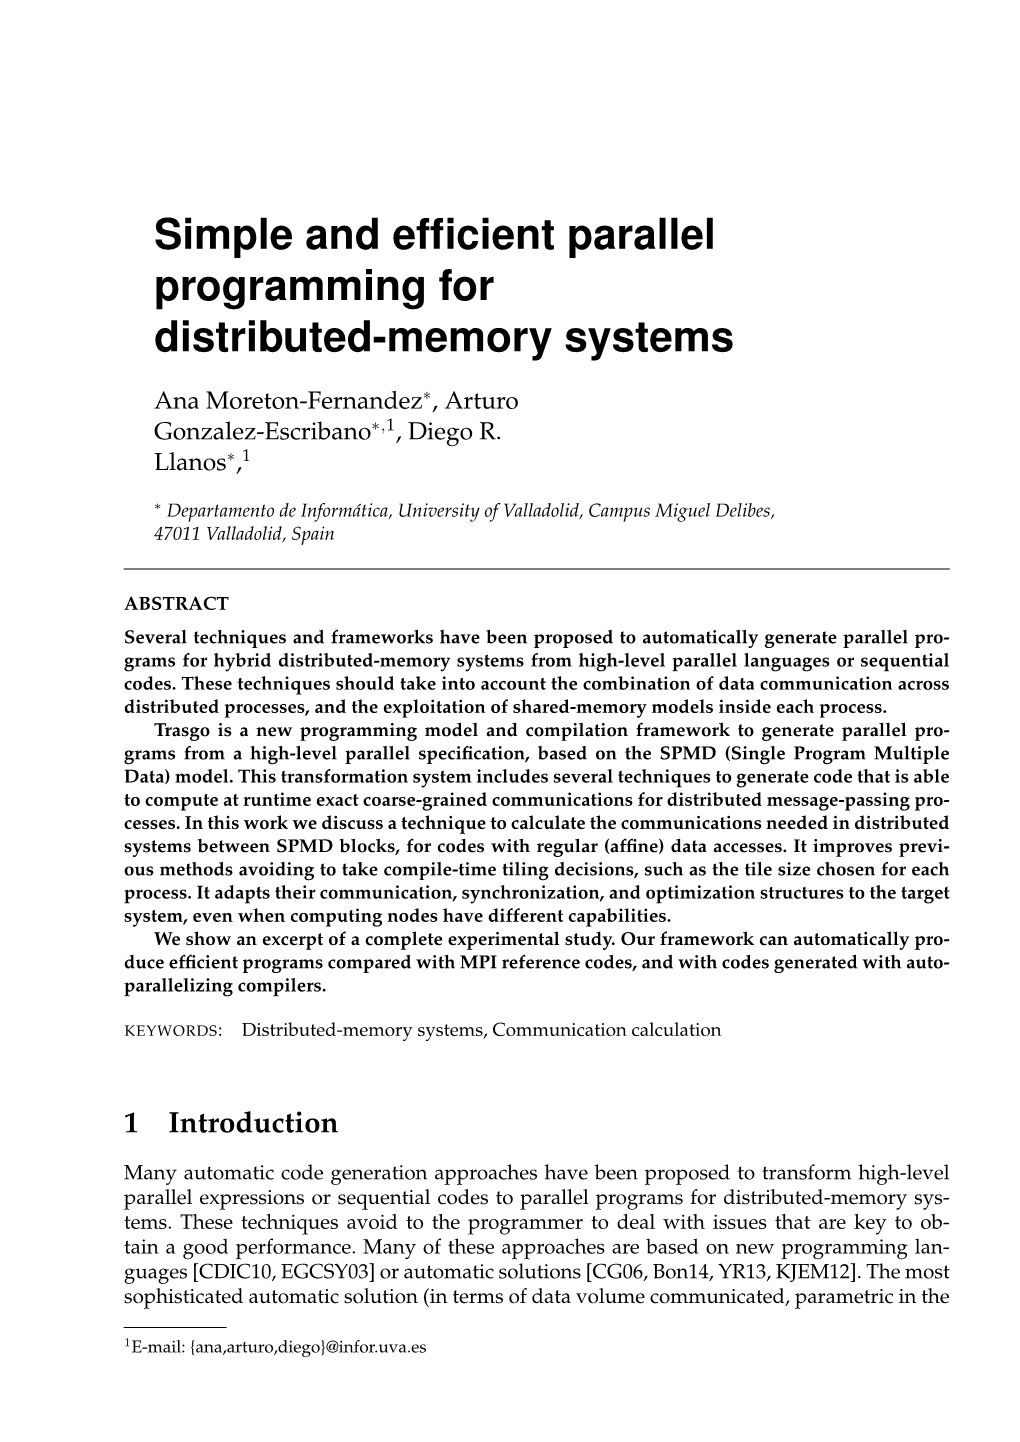 Simple and Efficient Parallel Programming for Distributed